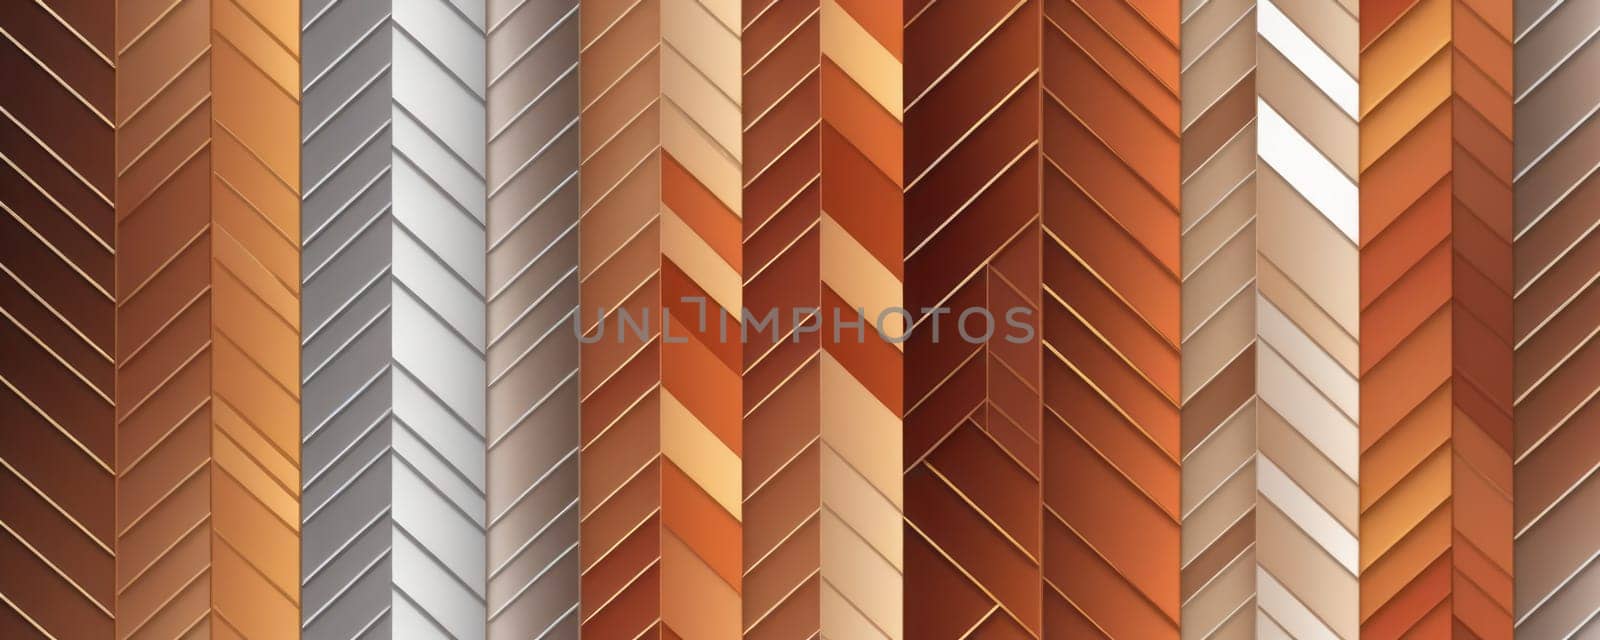 Zigzag Shapes in Silver and Sienna by nkotlyar